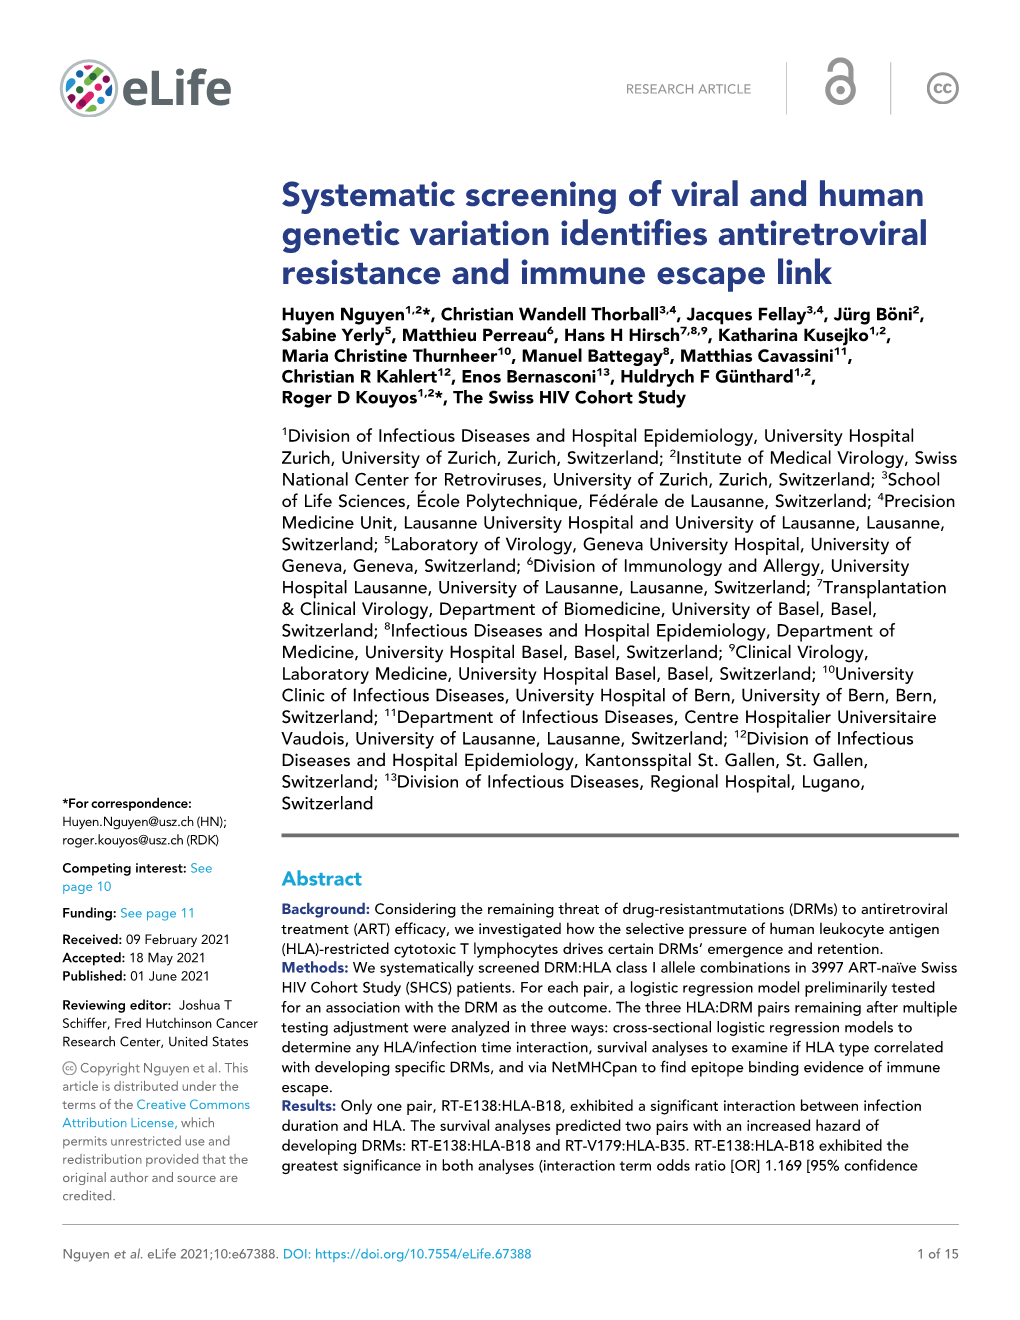 Systematic Screening of Viral and Human Genetic Variation Identifies Antiretroviral Resistance and Immune Escape Link